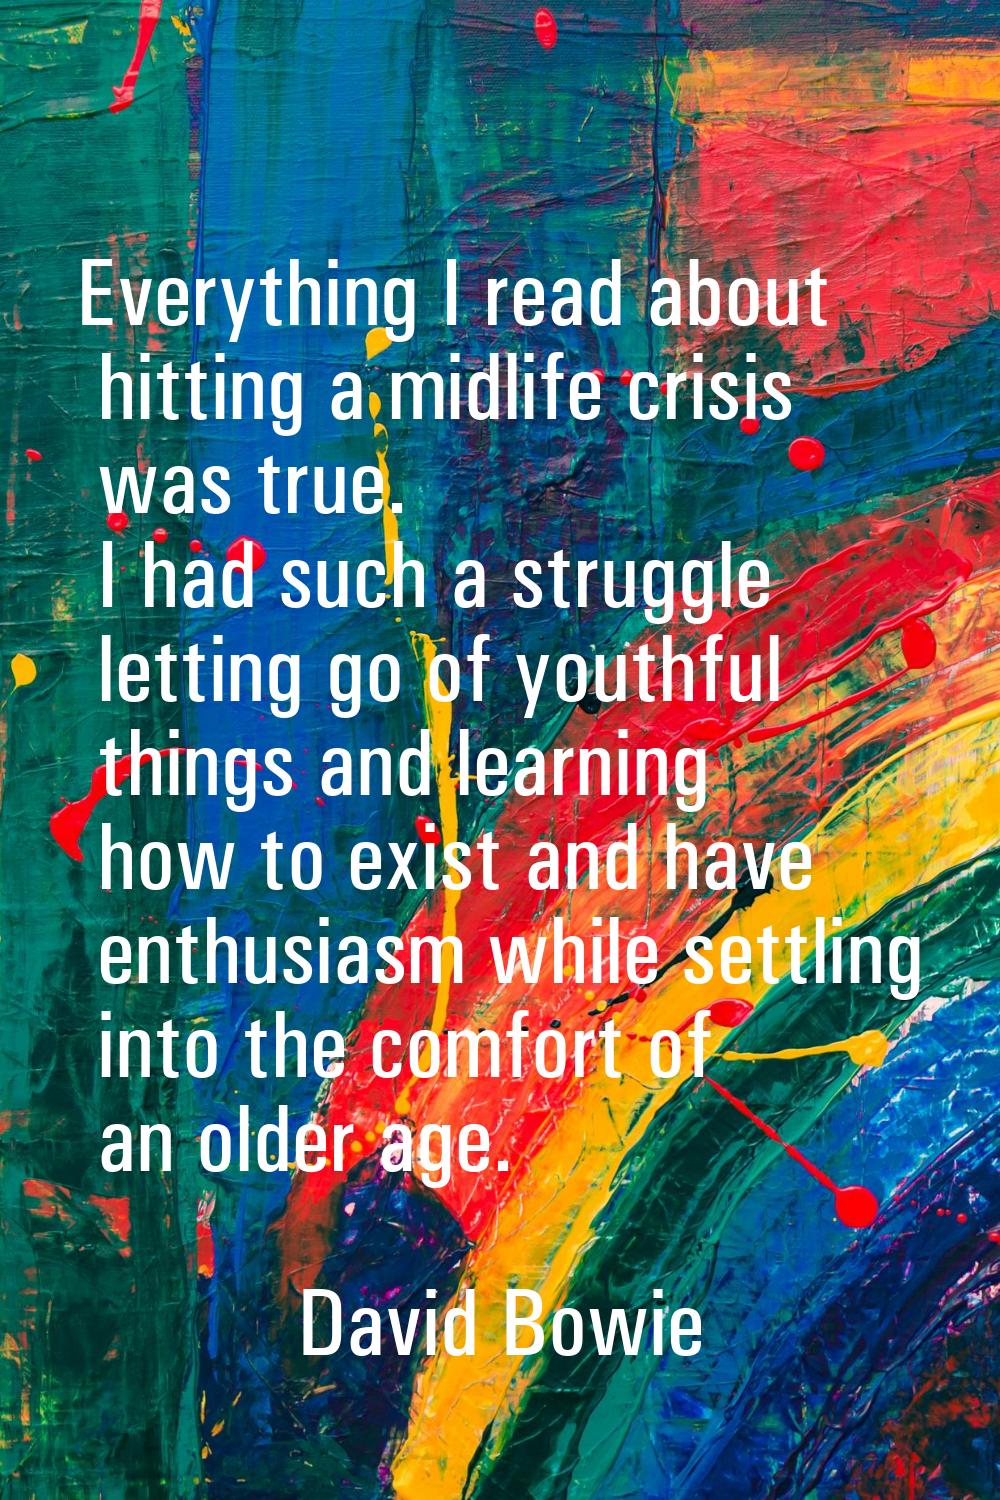 Everything I read about hitting a midlife crisis was true. I had such a struggle letting go of yout